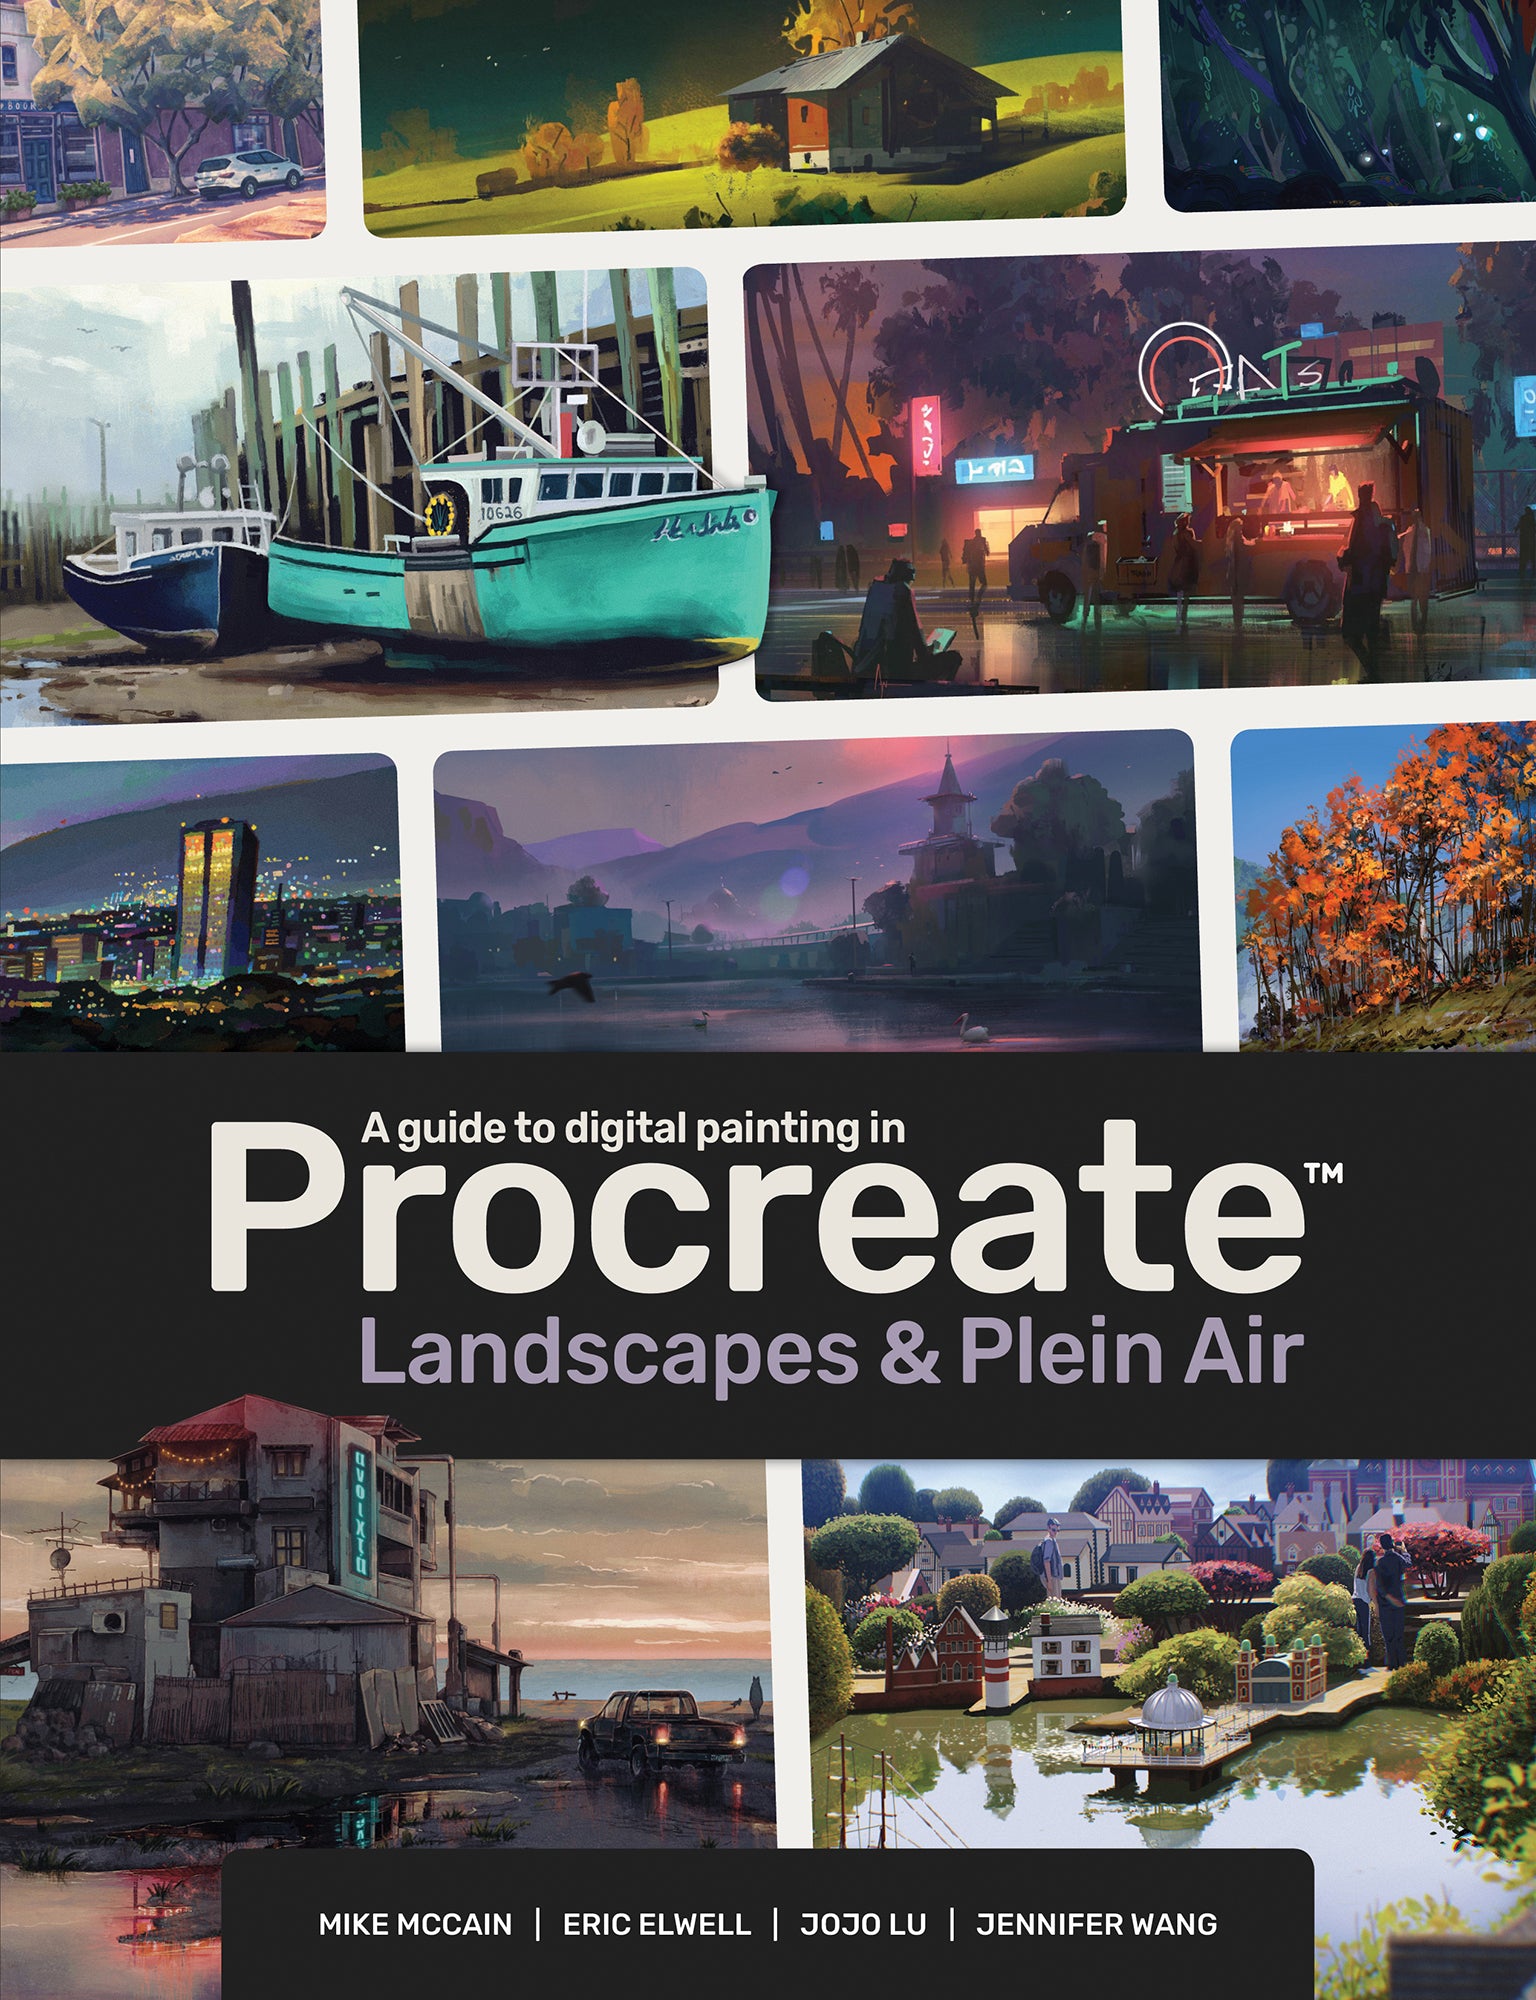 The cover showing title of book, overlaid on a collage of digital artworks depicting buildings, landscapes, and environments.